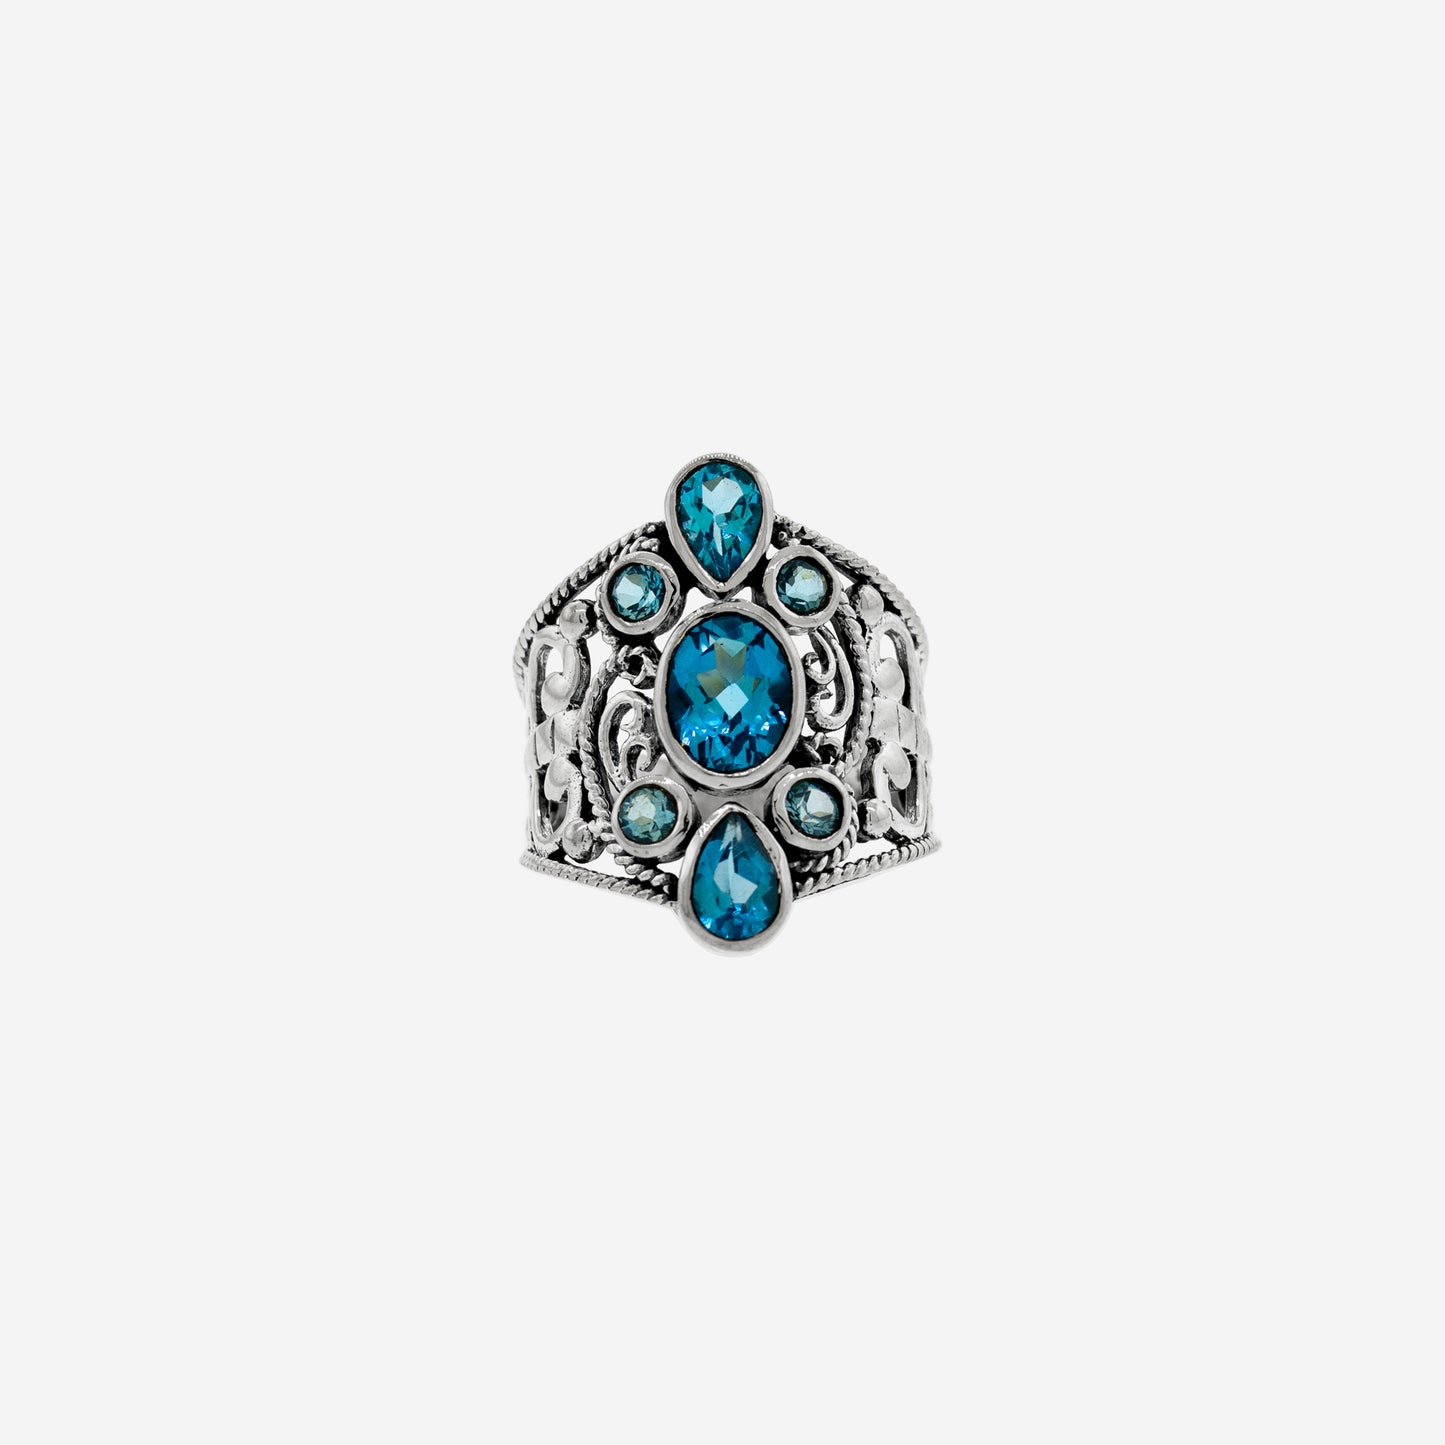 A Various Beautiful Stone Ring with Filigree Cutout adorned with beautiful blue topaz stones from Super Silver.